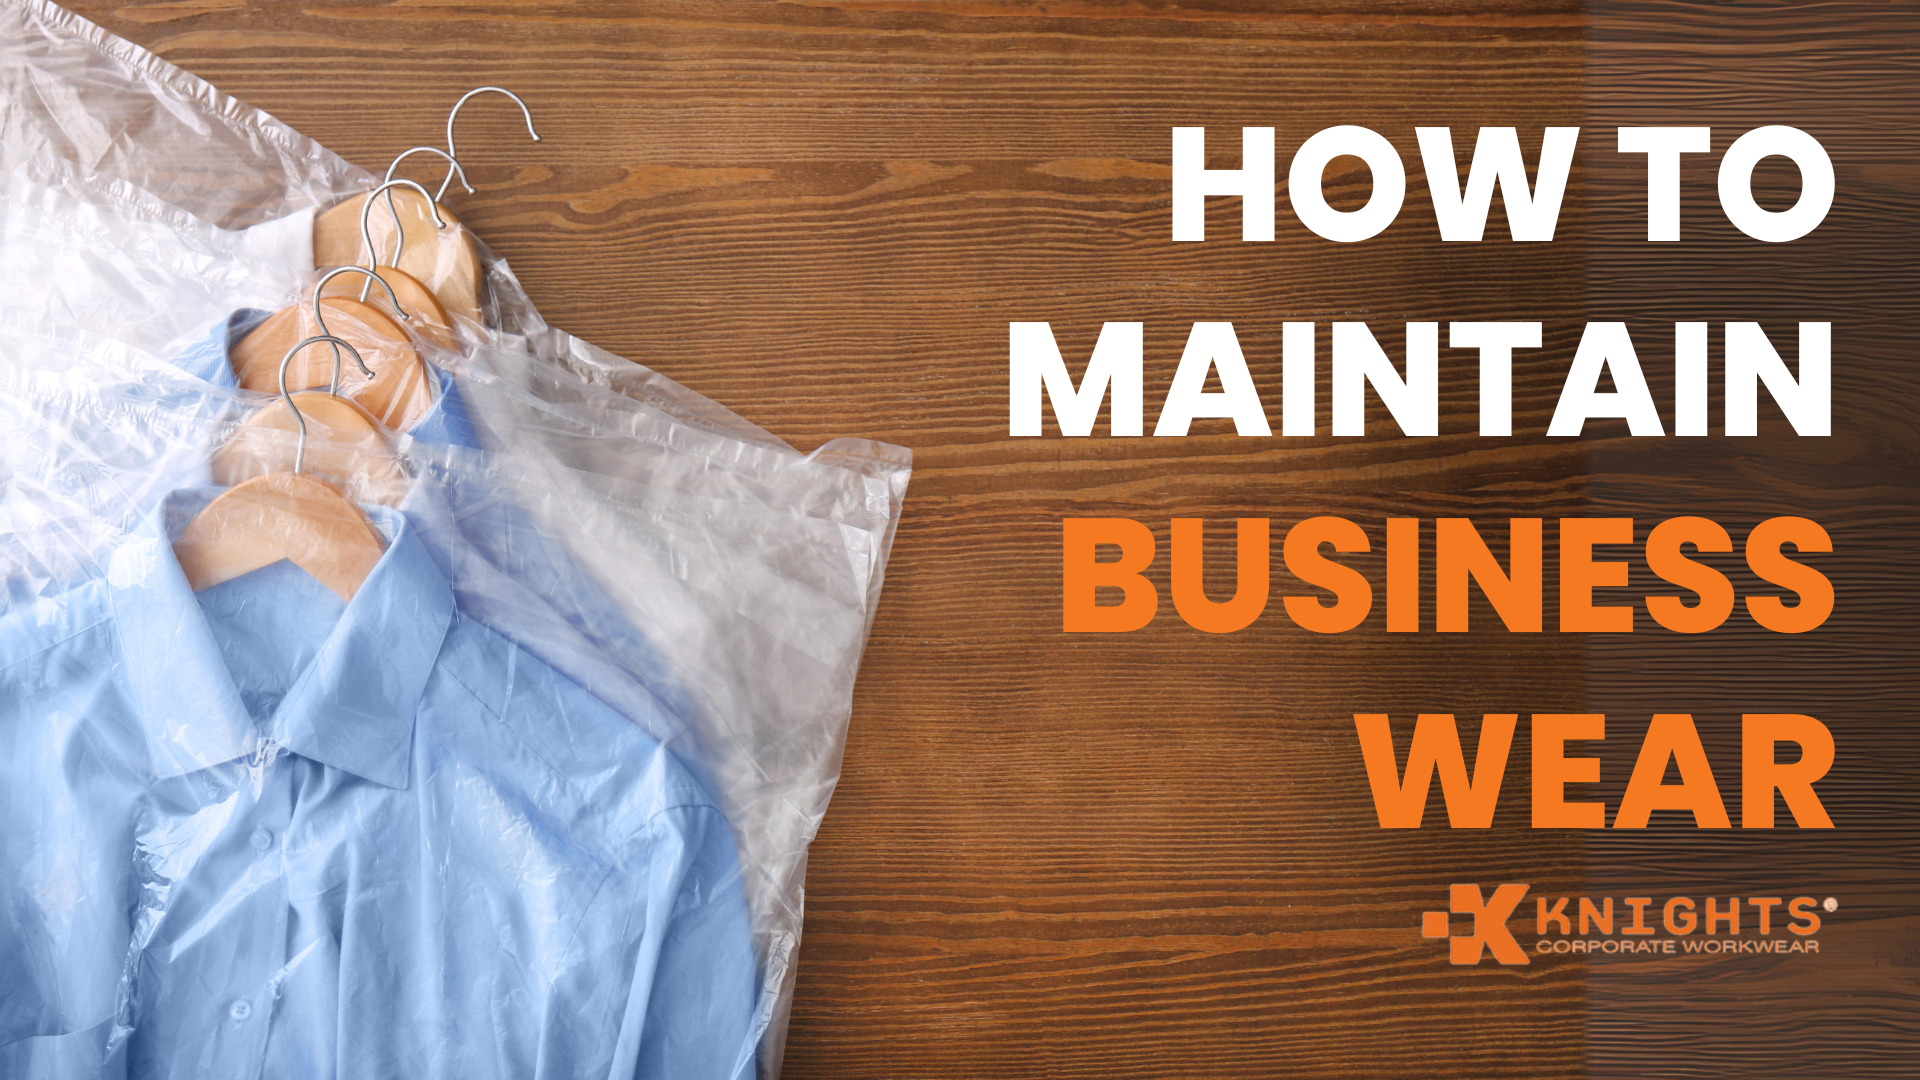 How to Maintain Business wear